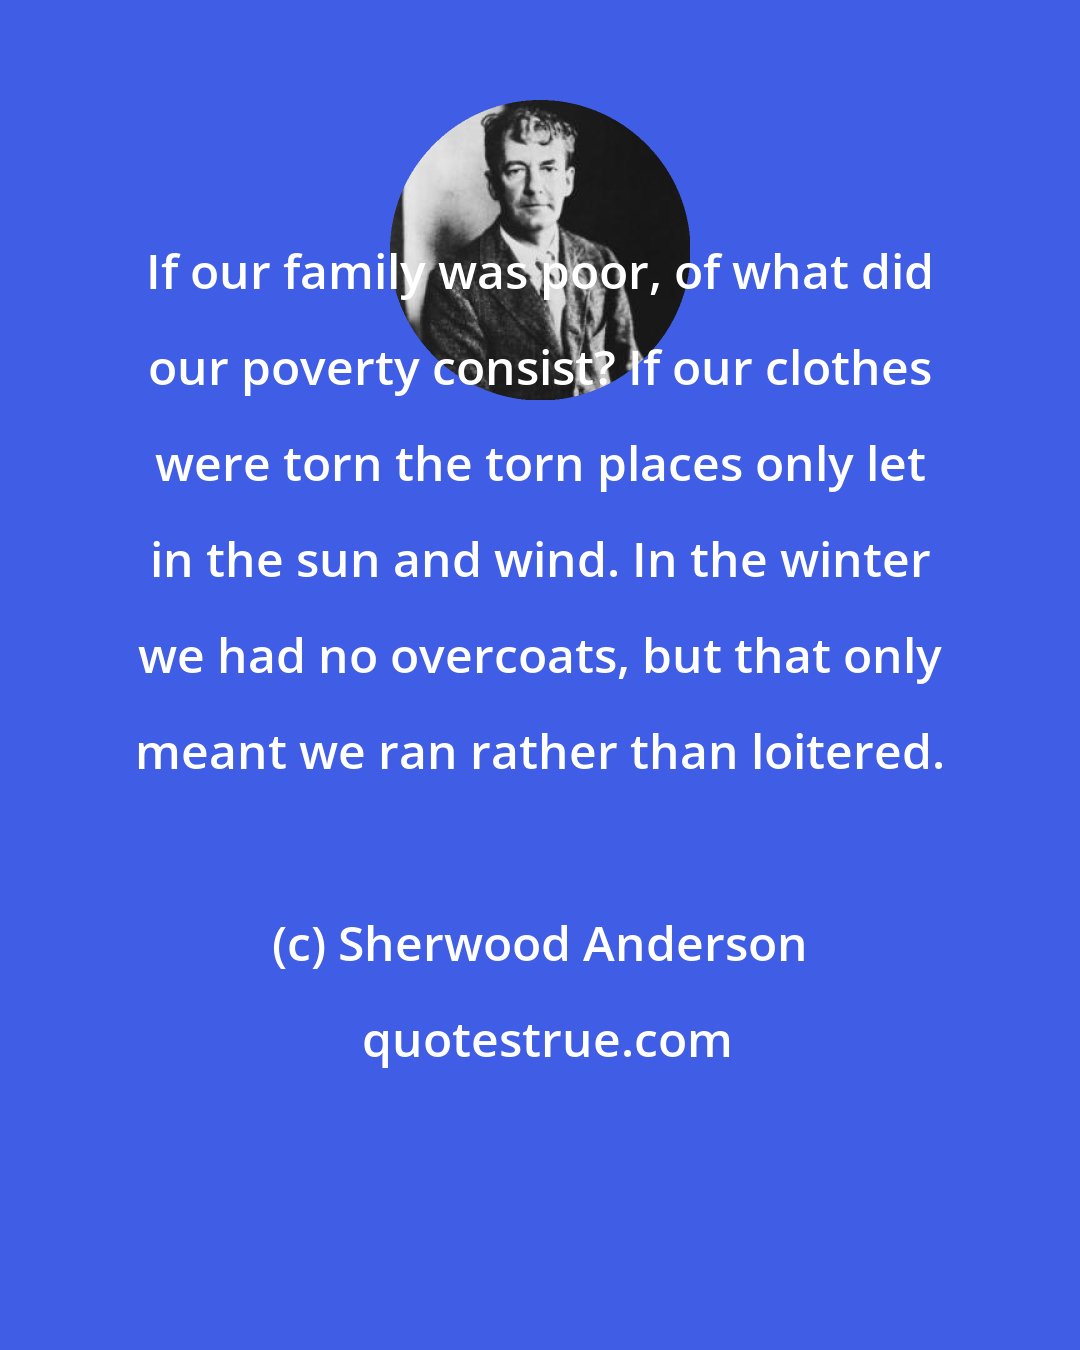 Sherwood Anderson: If our family was poor, of what did our poverty consist? If our clothes were torn the torn places only let in the sun and wind. In the winter we had no overcoats, but that only meant we ran rather than loitered.